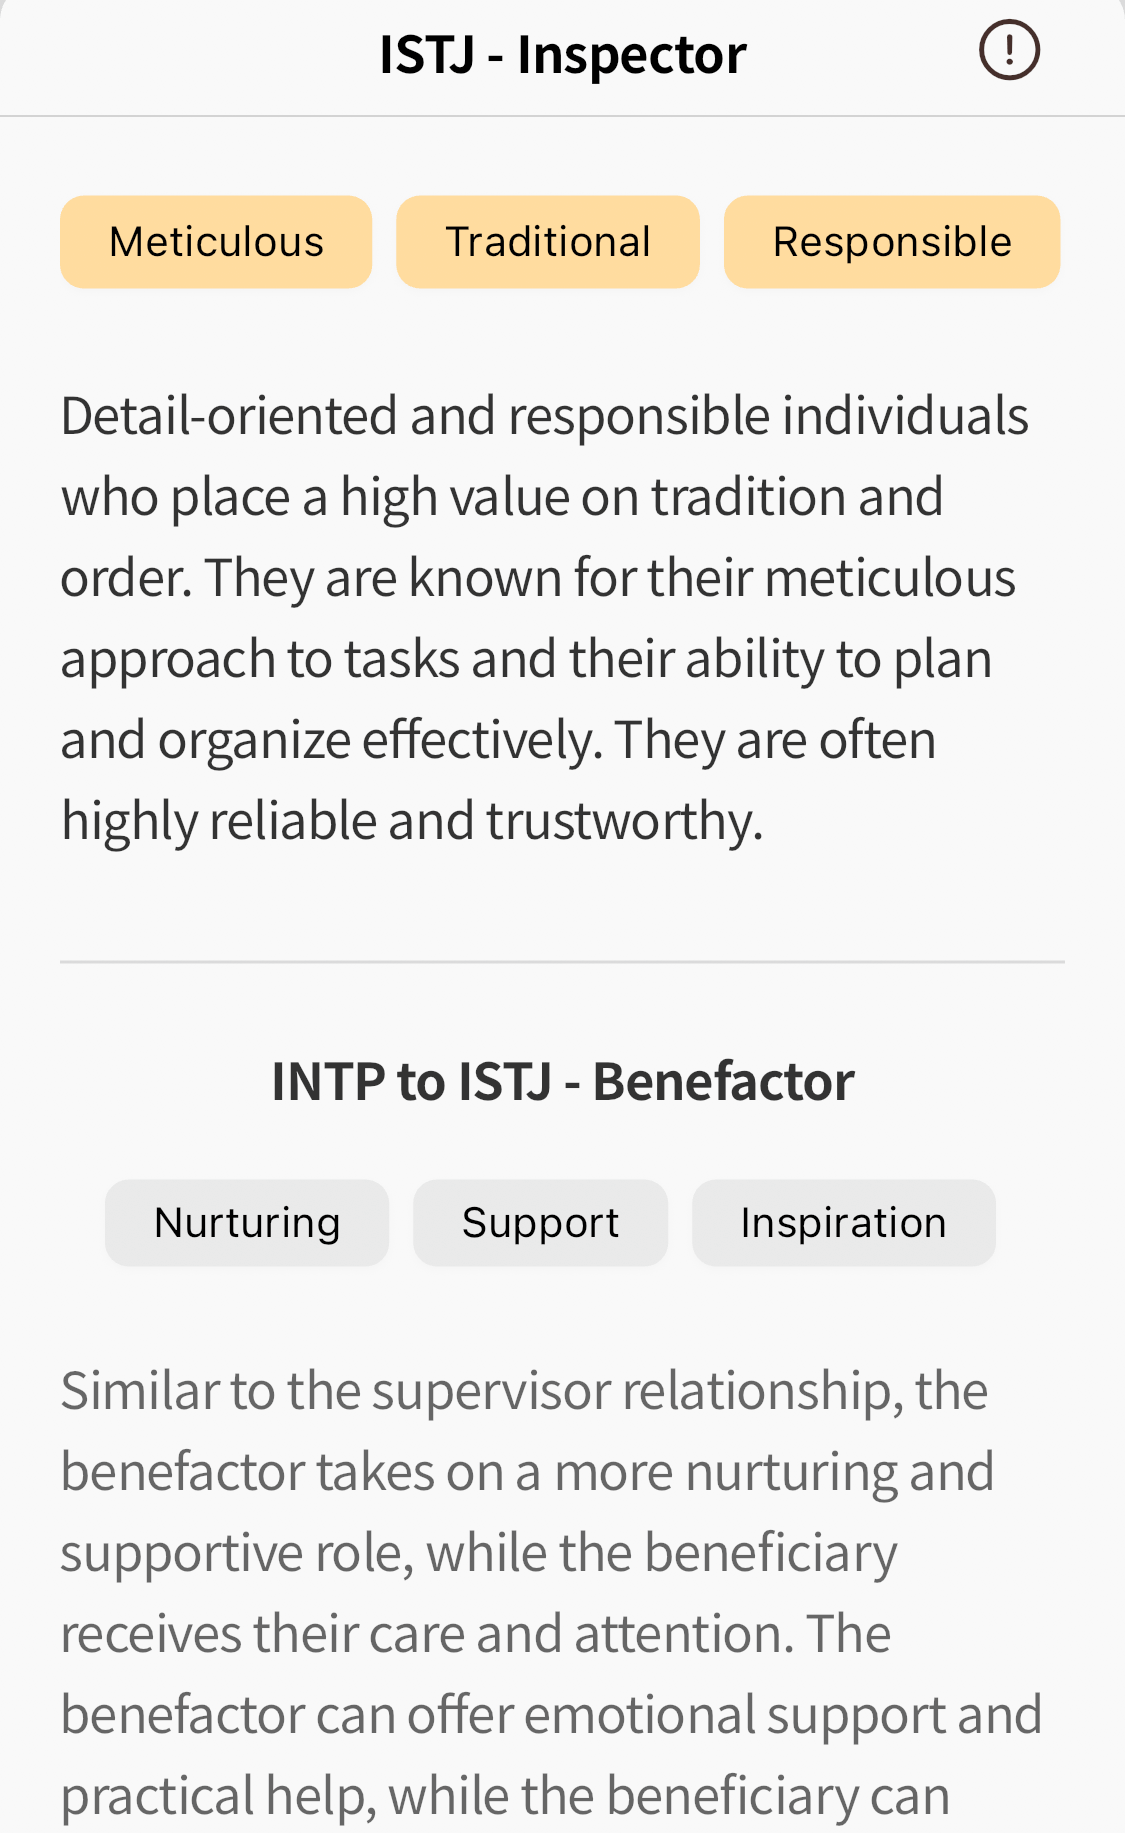 Personality Type of Members